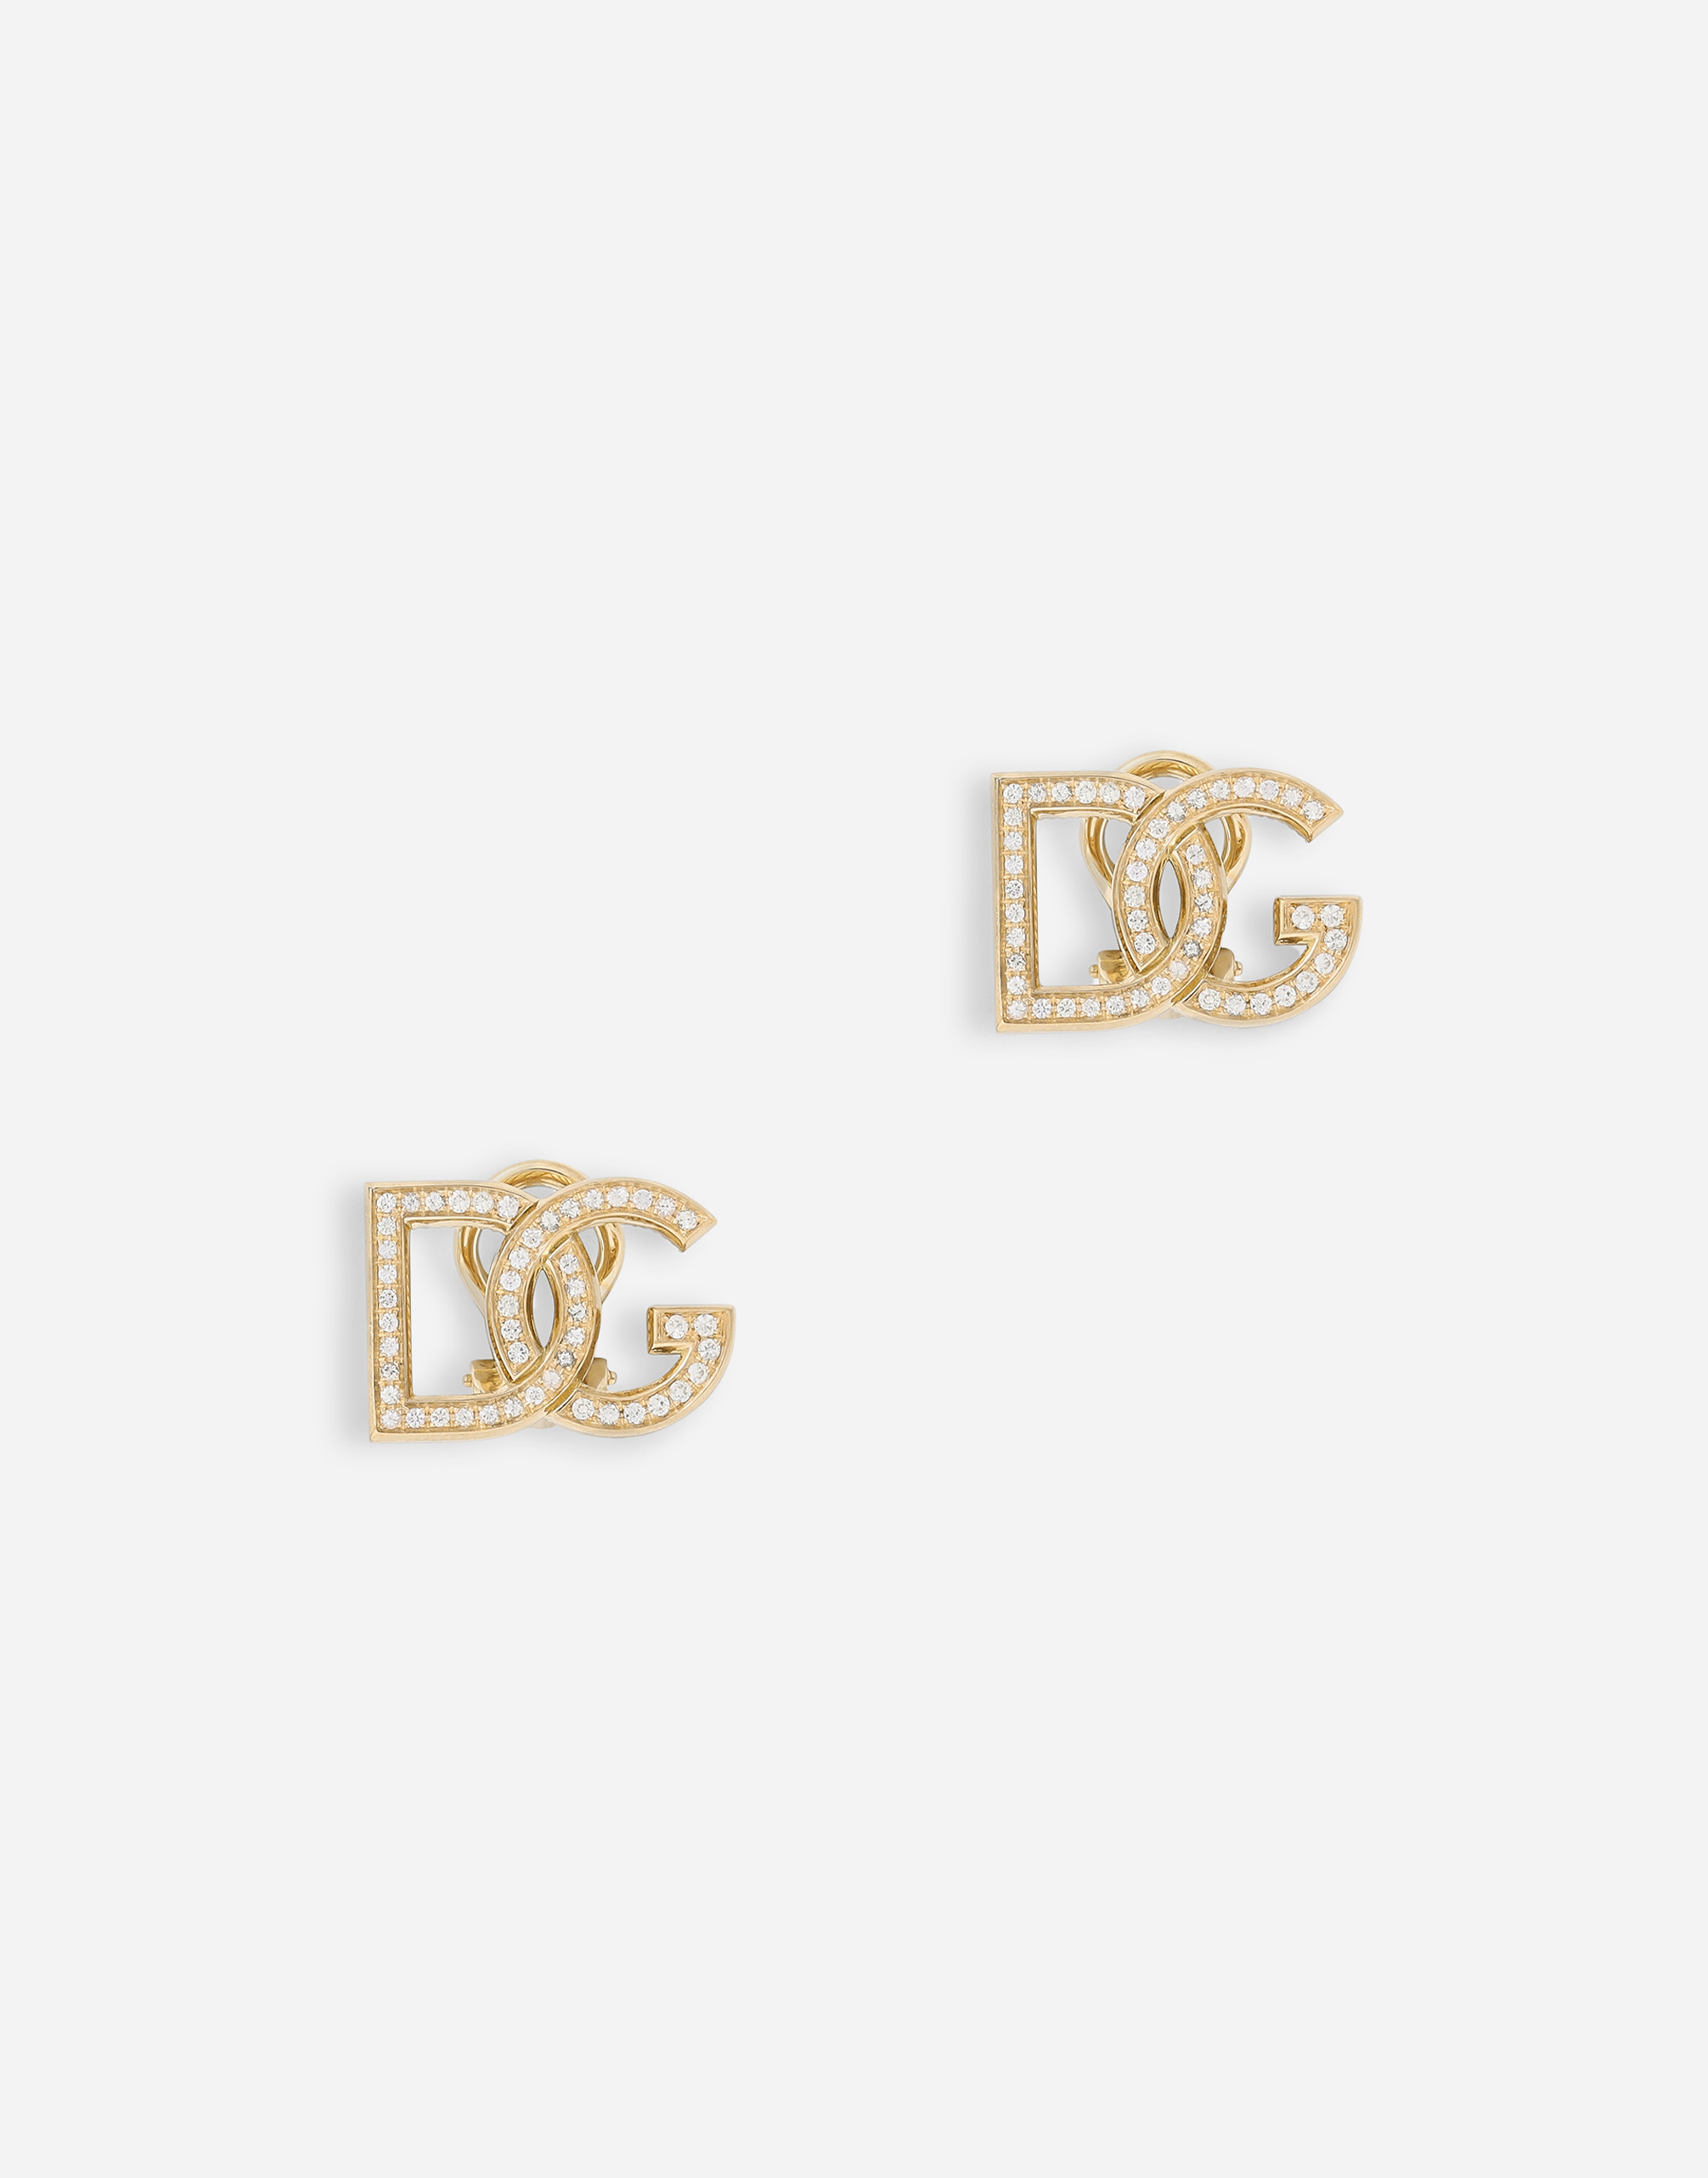 Dolce & Gabbana Logo clip-on earrings in yellow 18kt gold with colourless sapphires